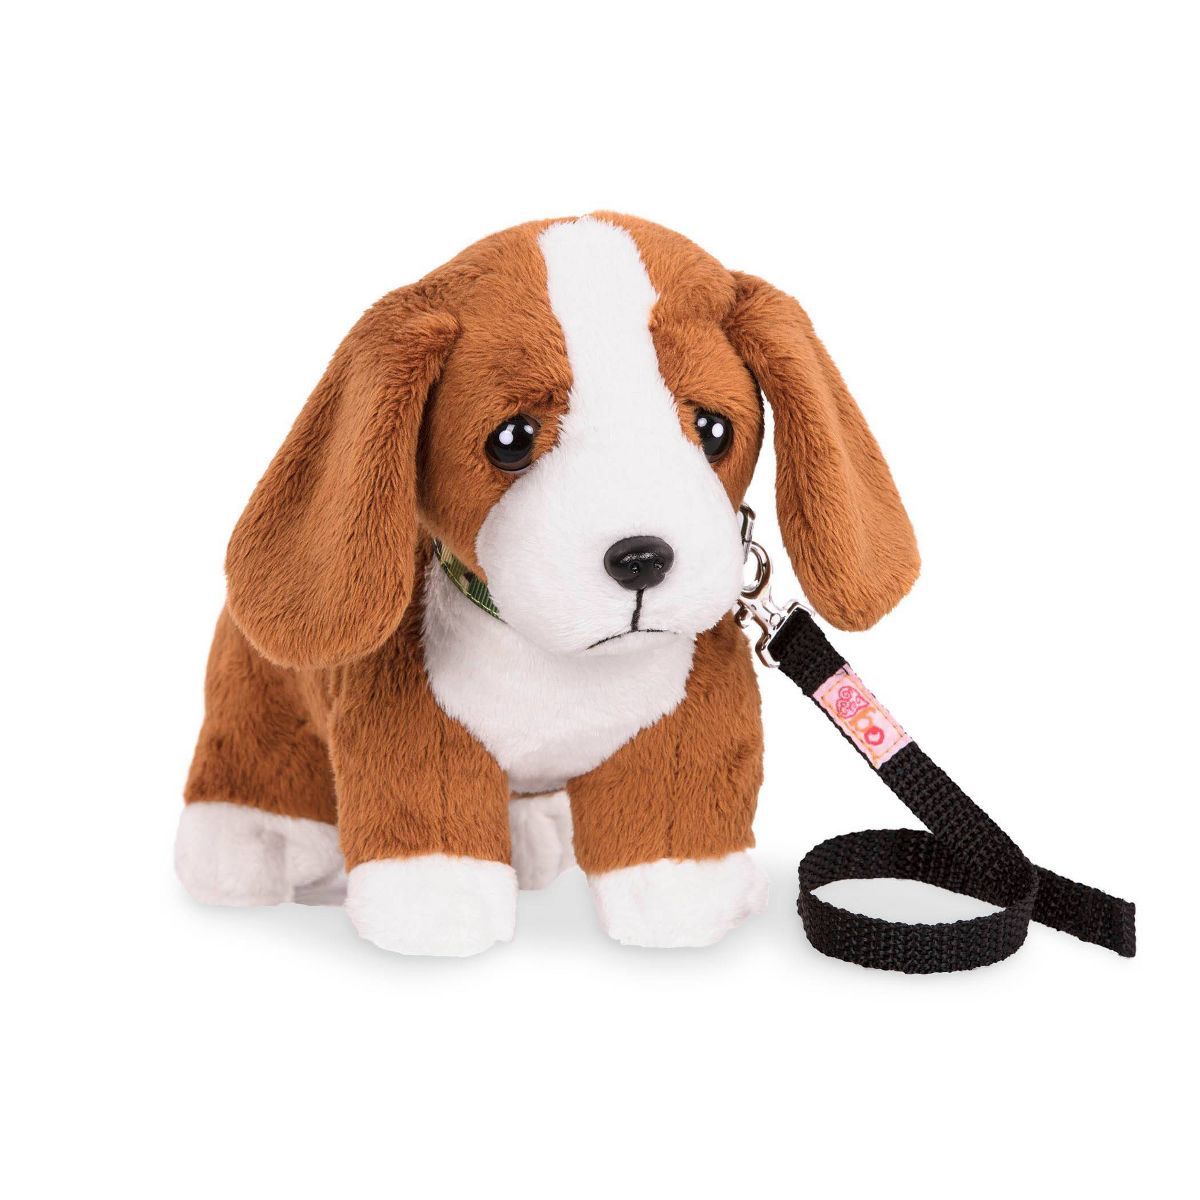 Our Generation Pet Dog Plush with Posable Legs - Basset Hound Pup | Target